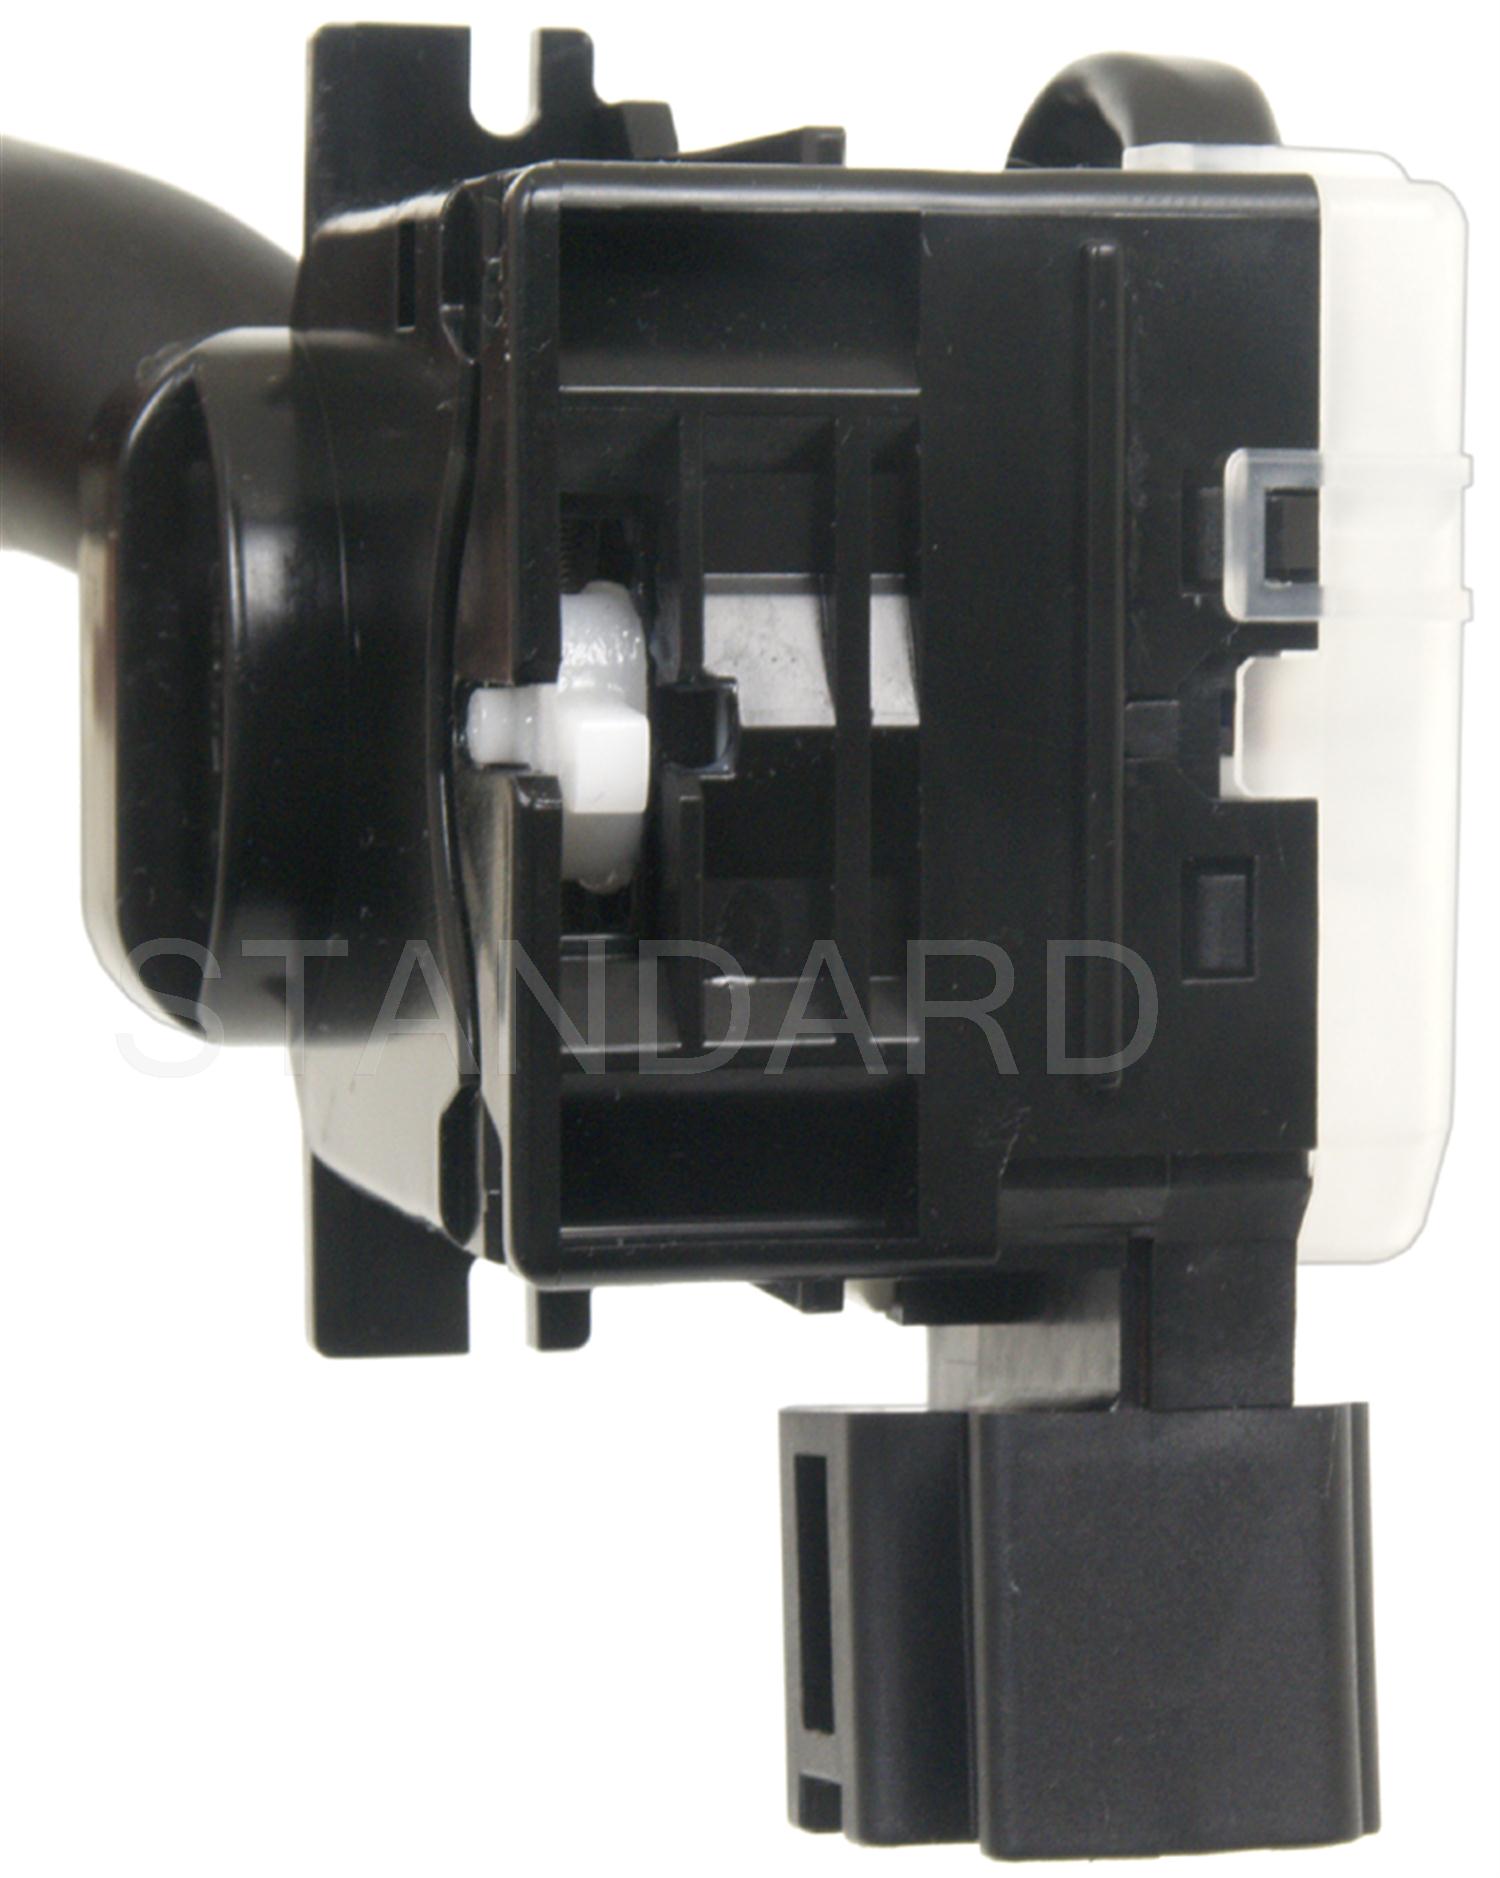 Picture of Standard Motor Products CBS1241 Standard Motor Products Cbs-1241 Combination Switch